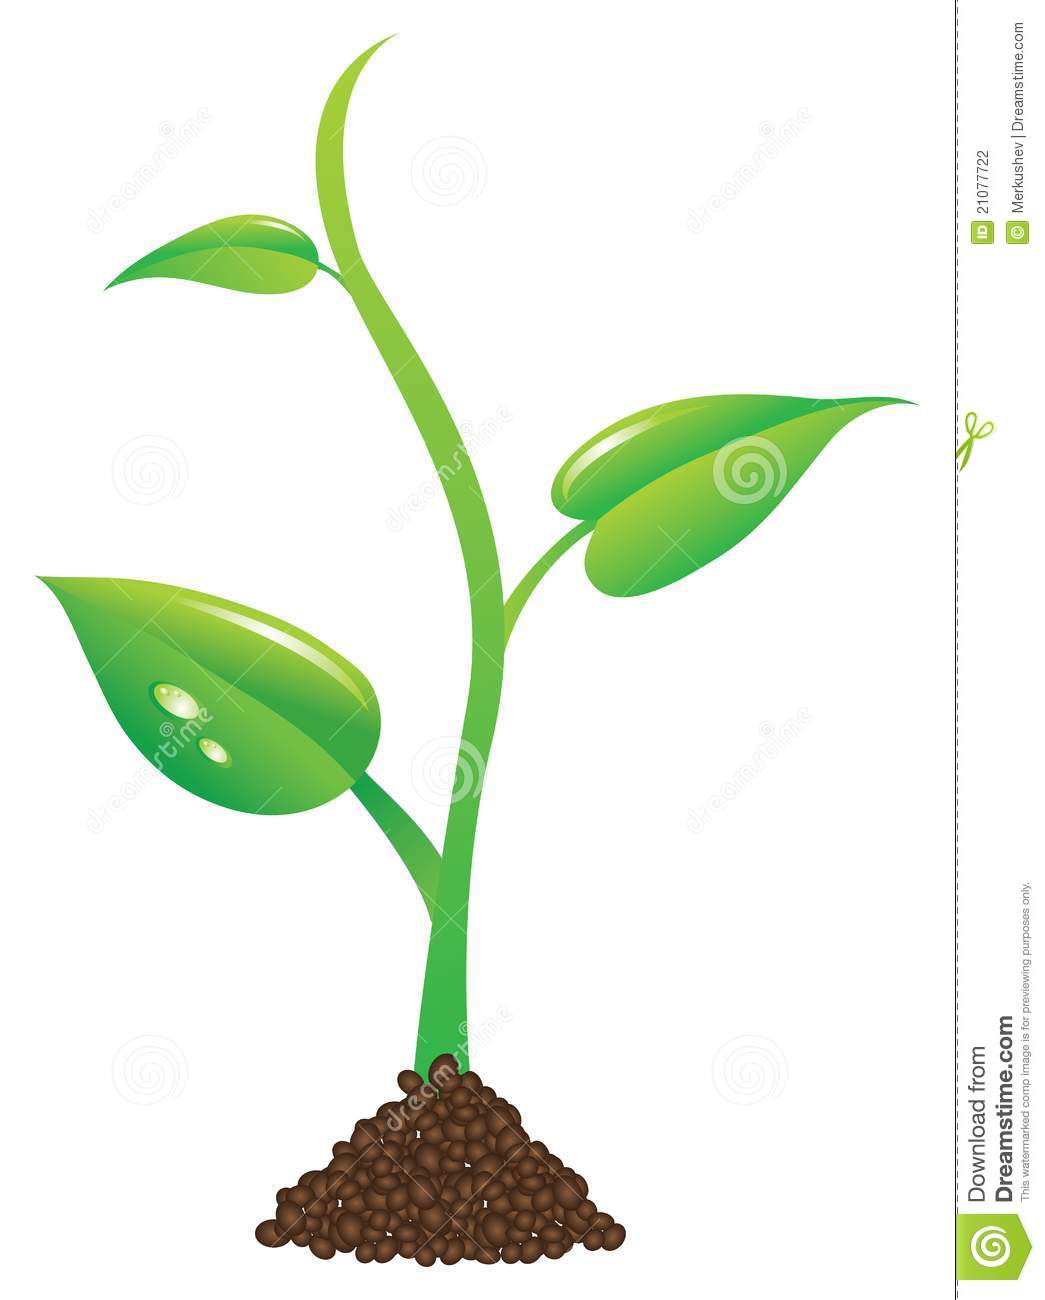 Seedling clipart free.